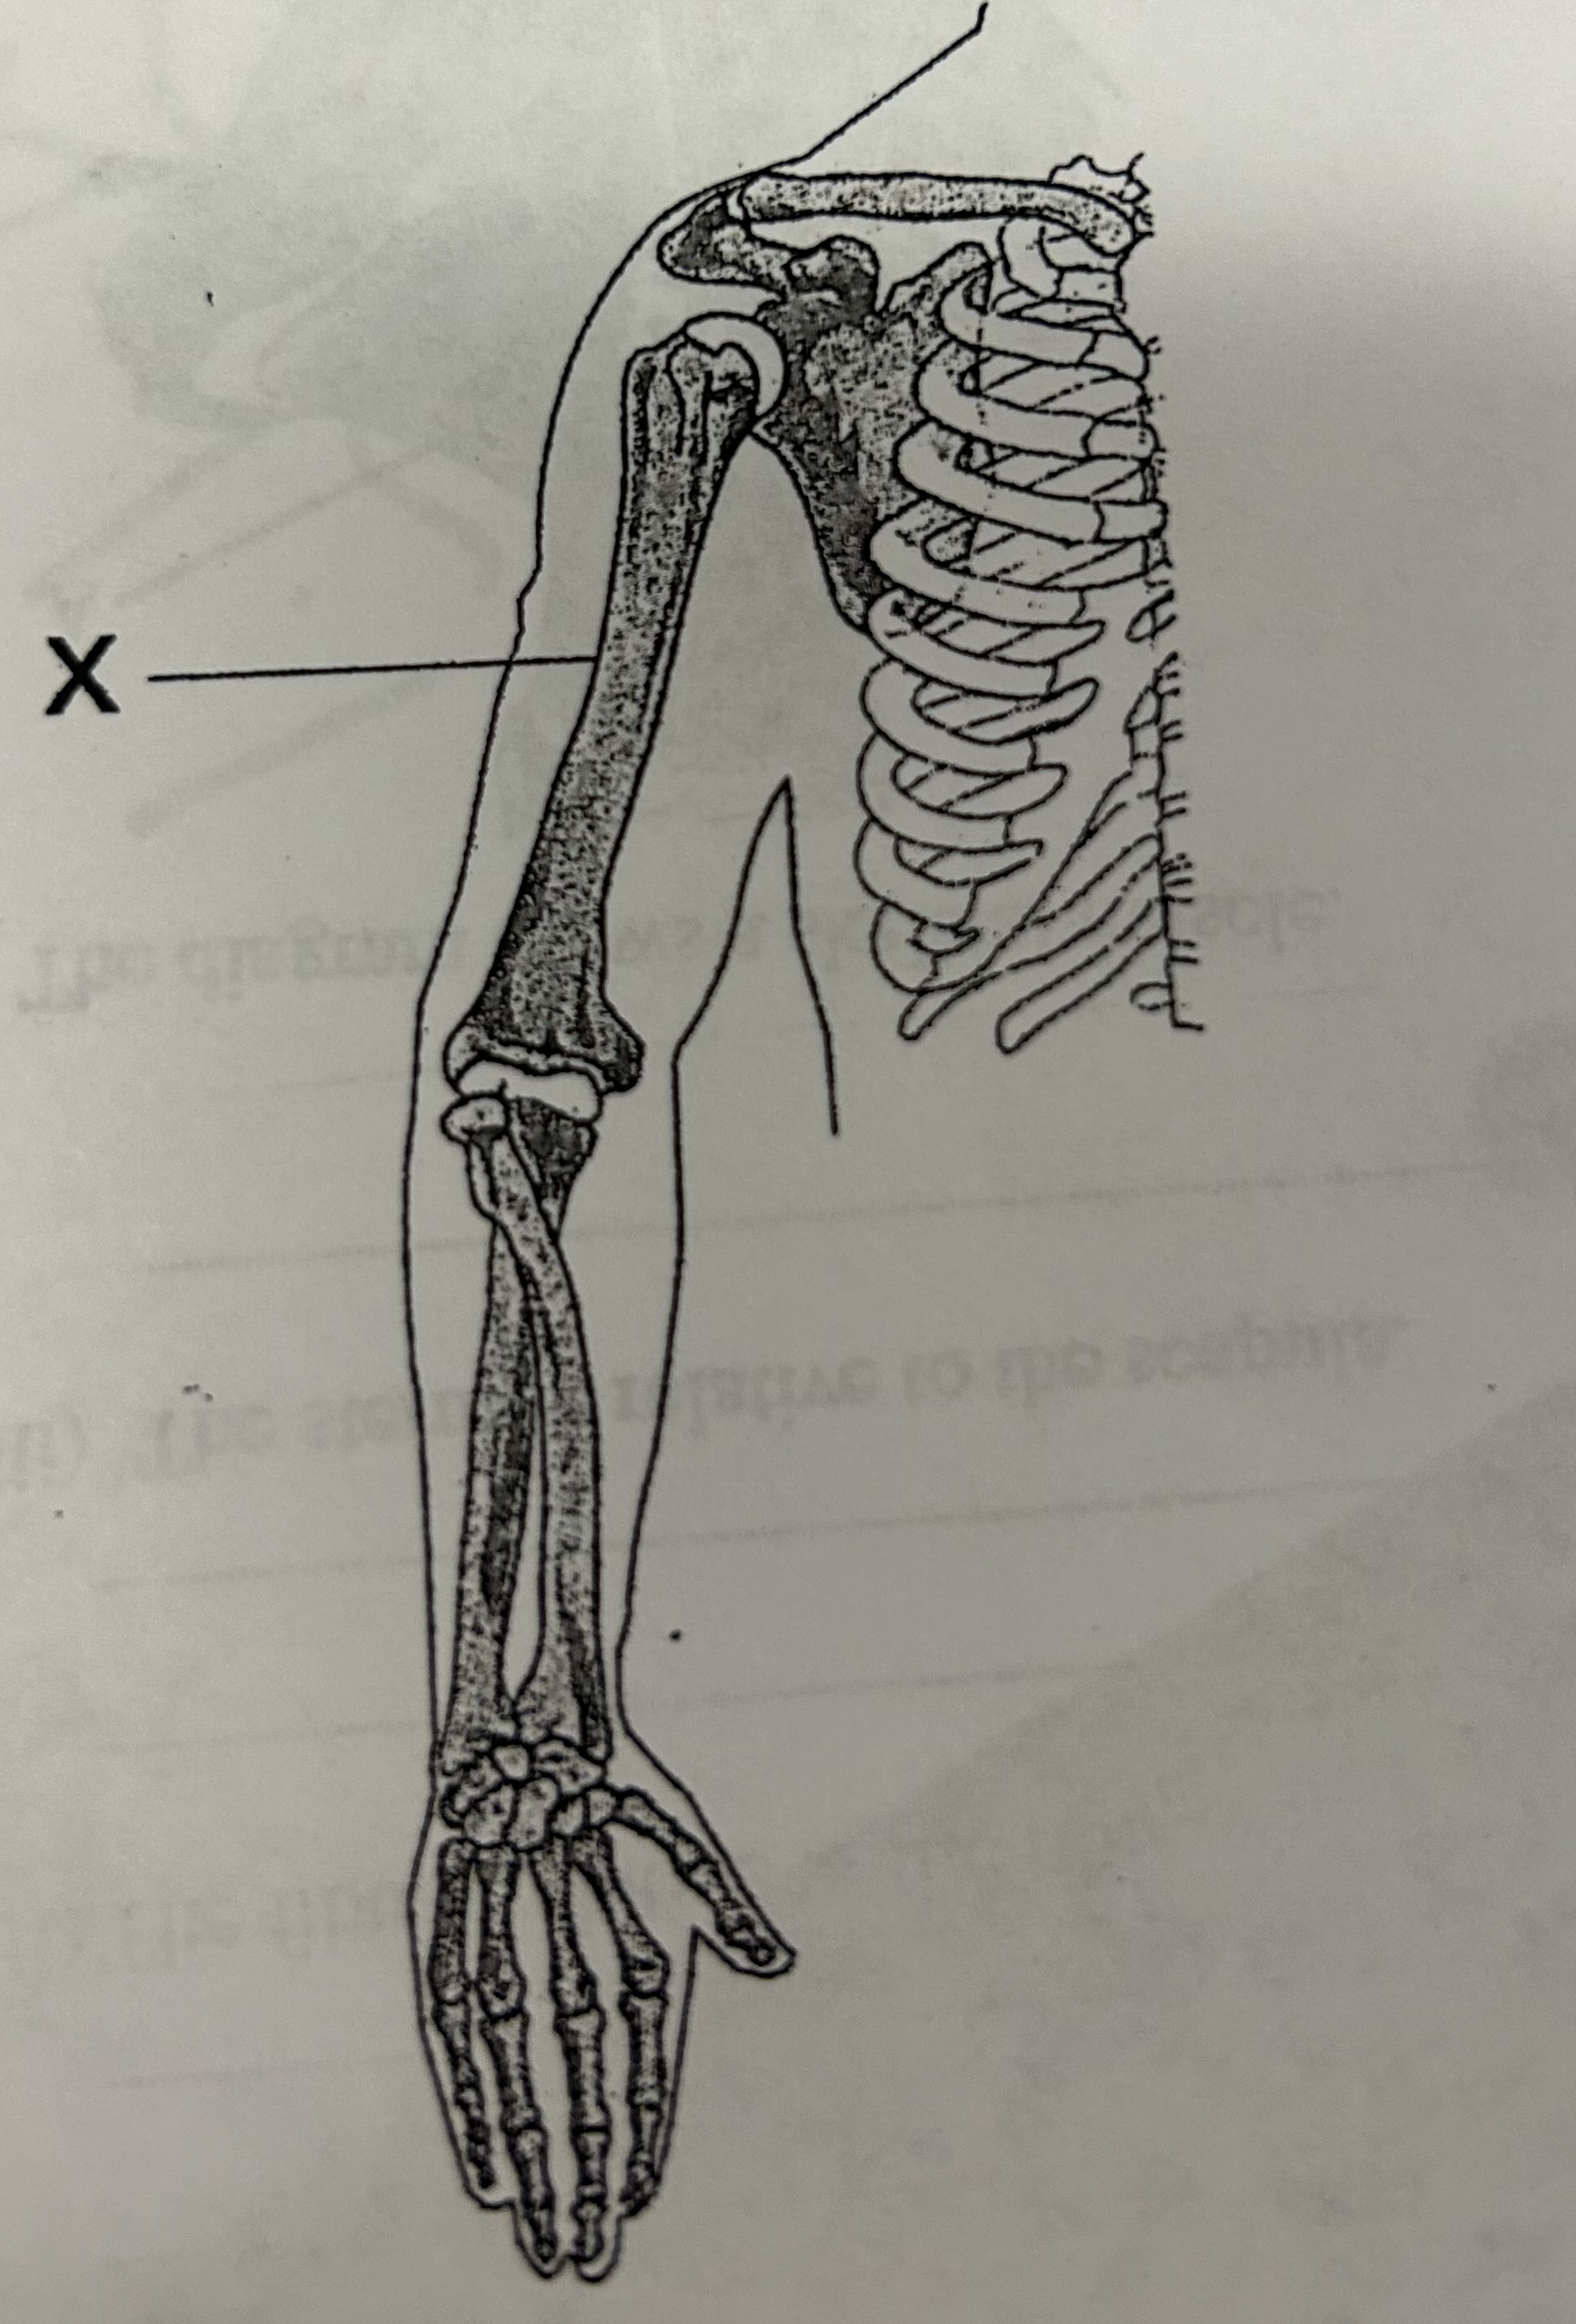 <p>What is the name of the bone indicated by label X in the diagram below?</p>